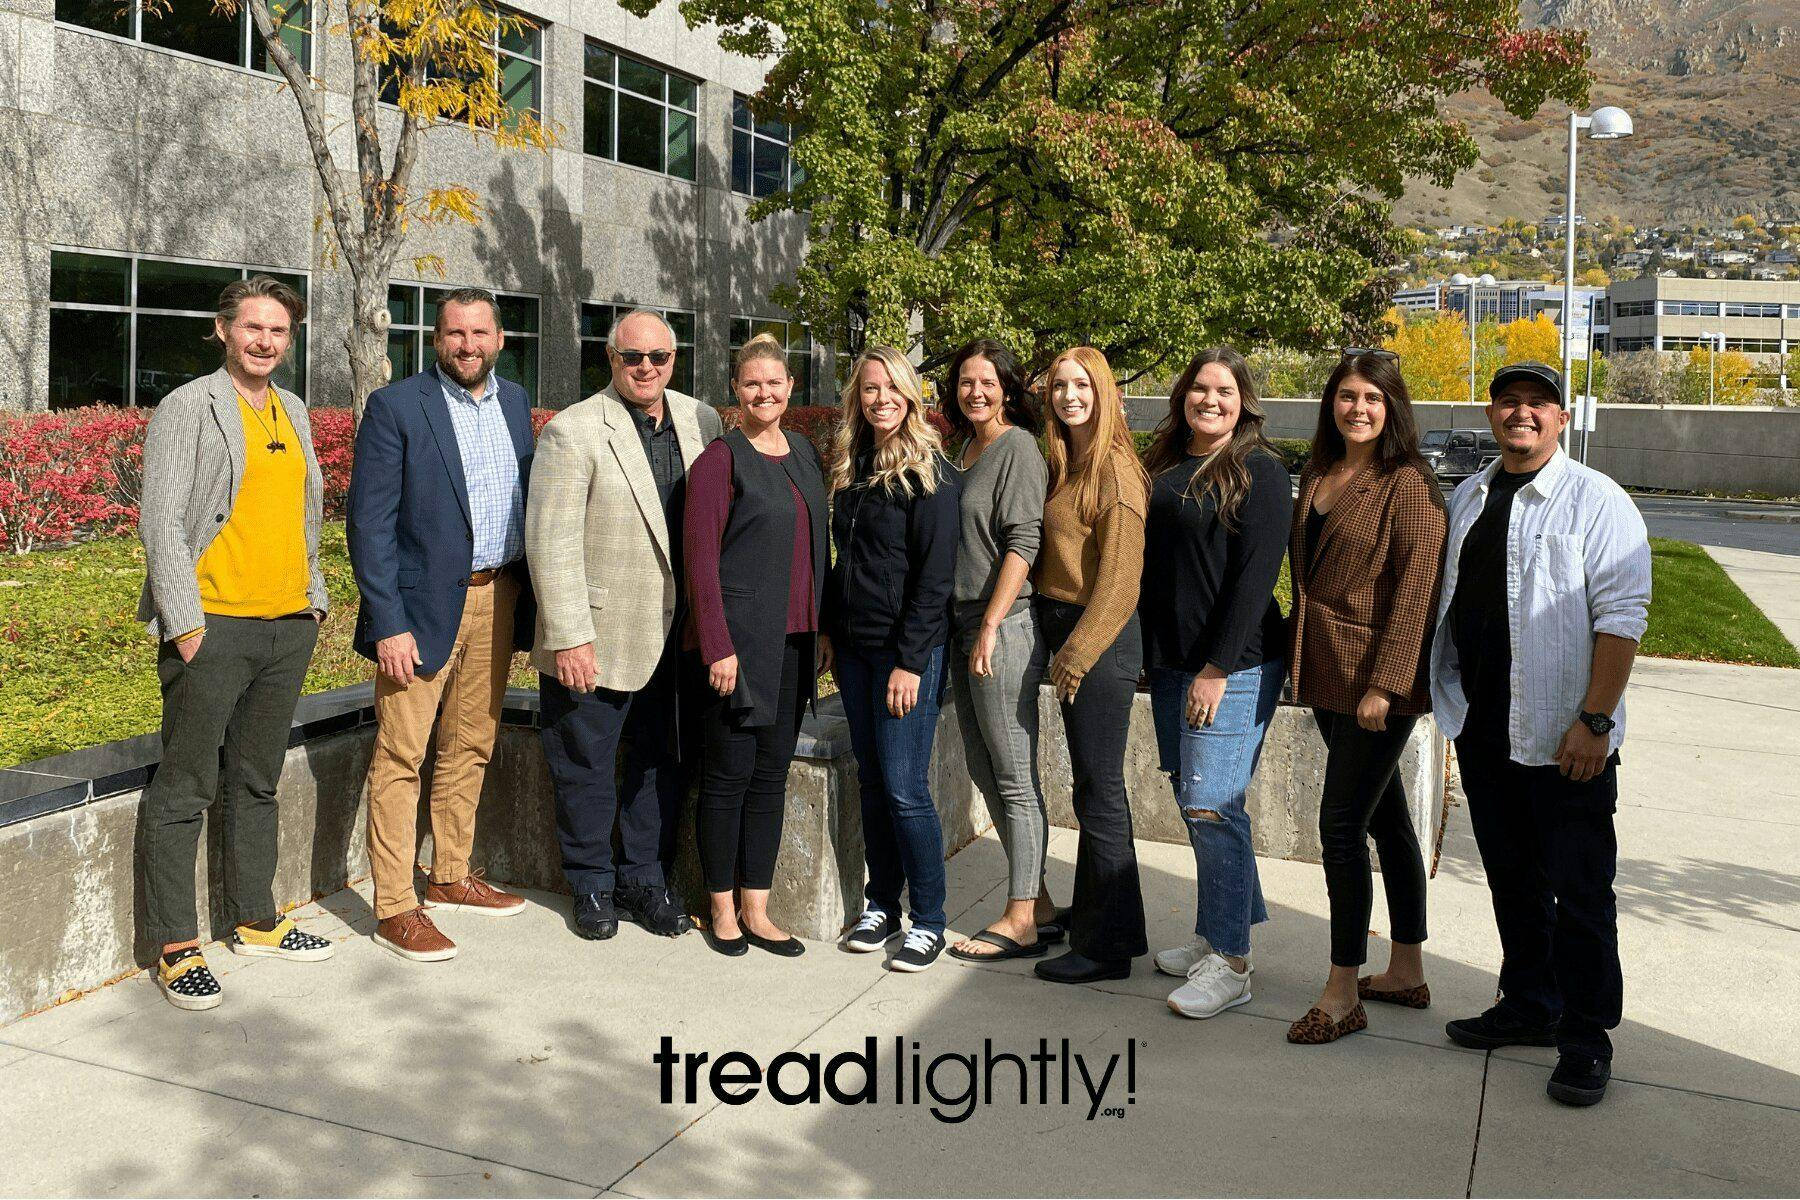 The treadlightly! team standing in a row in front of a building.